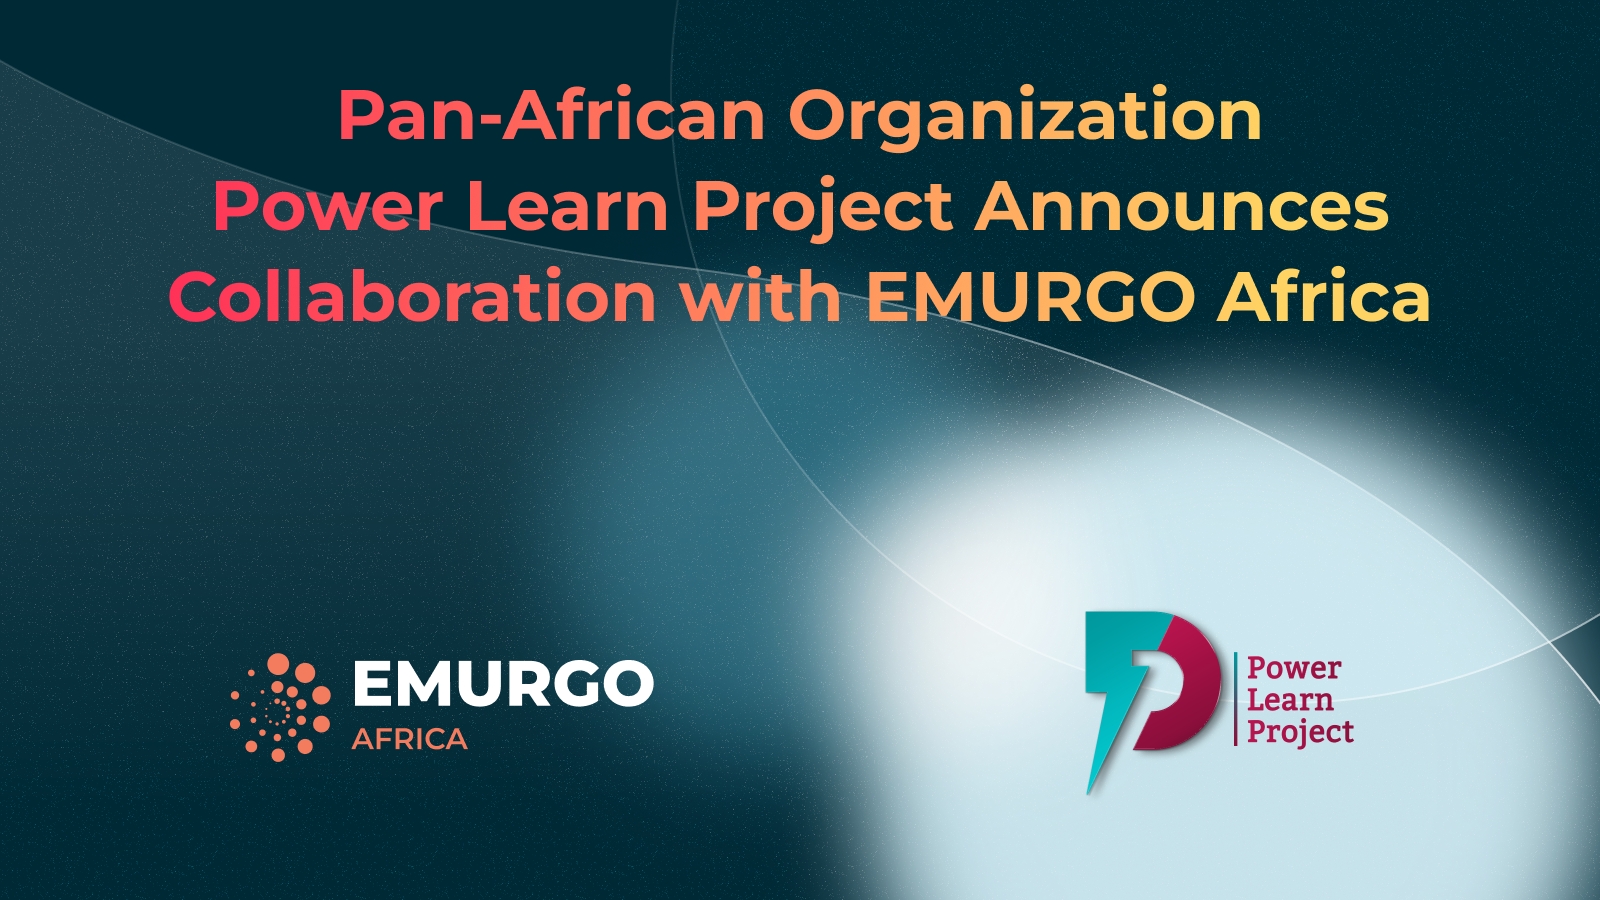 Pan-African Organization Power Learn Project Announces Collaboration with EMURGO Africa